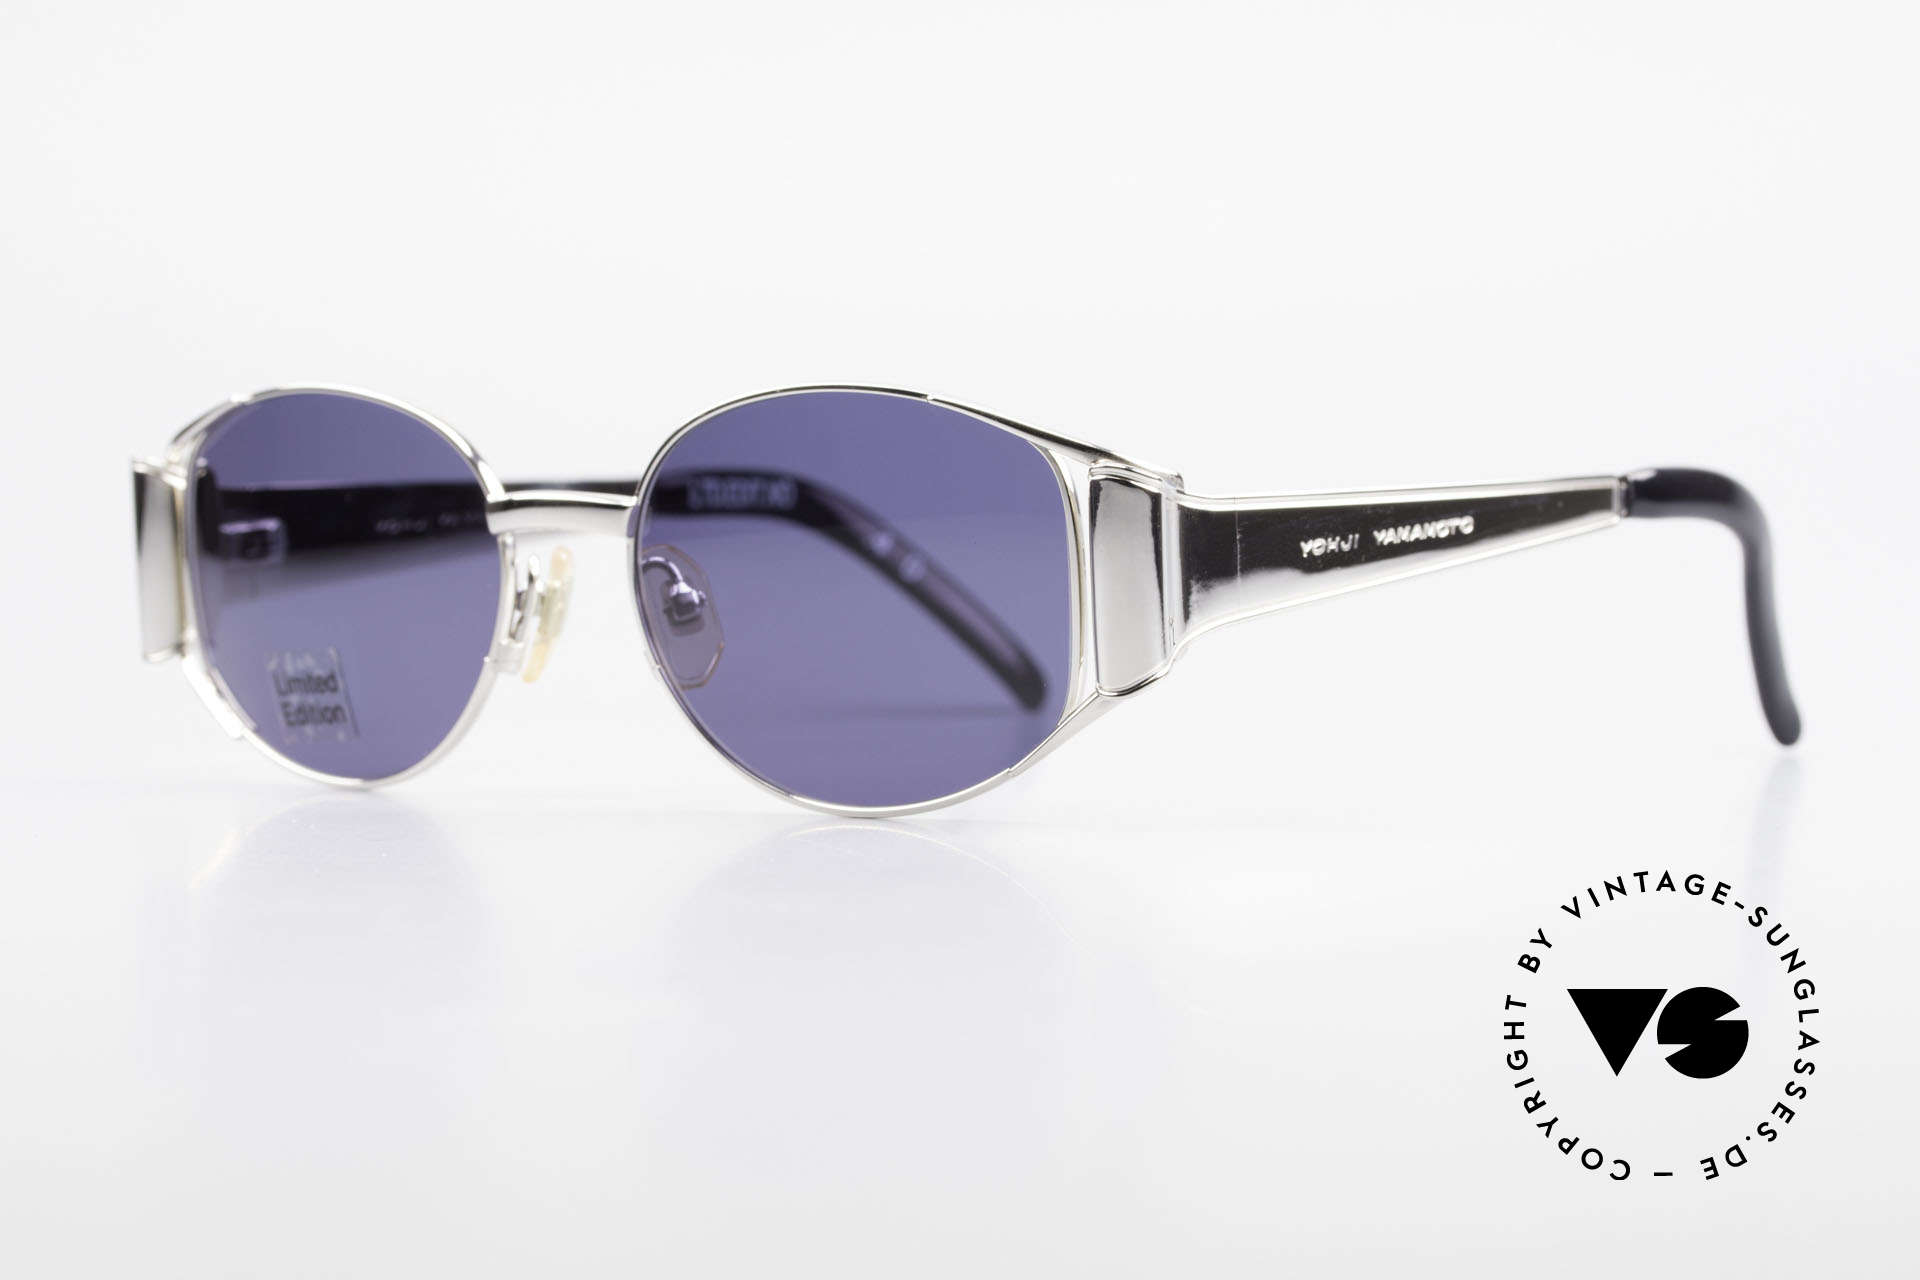 Yohji Yamamoto 52-5107 Limited Edition Sunglasses, massive metal frame in high-end quality (made in Japan), Made for Men and Women